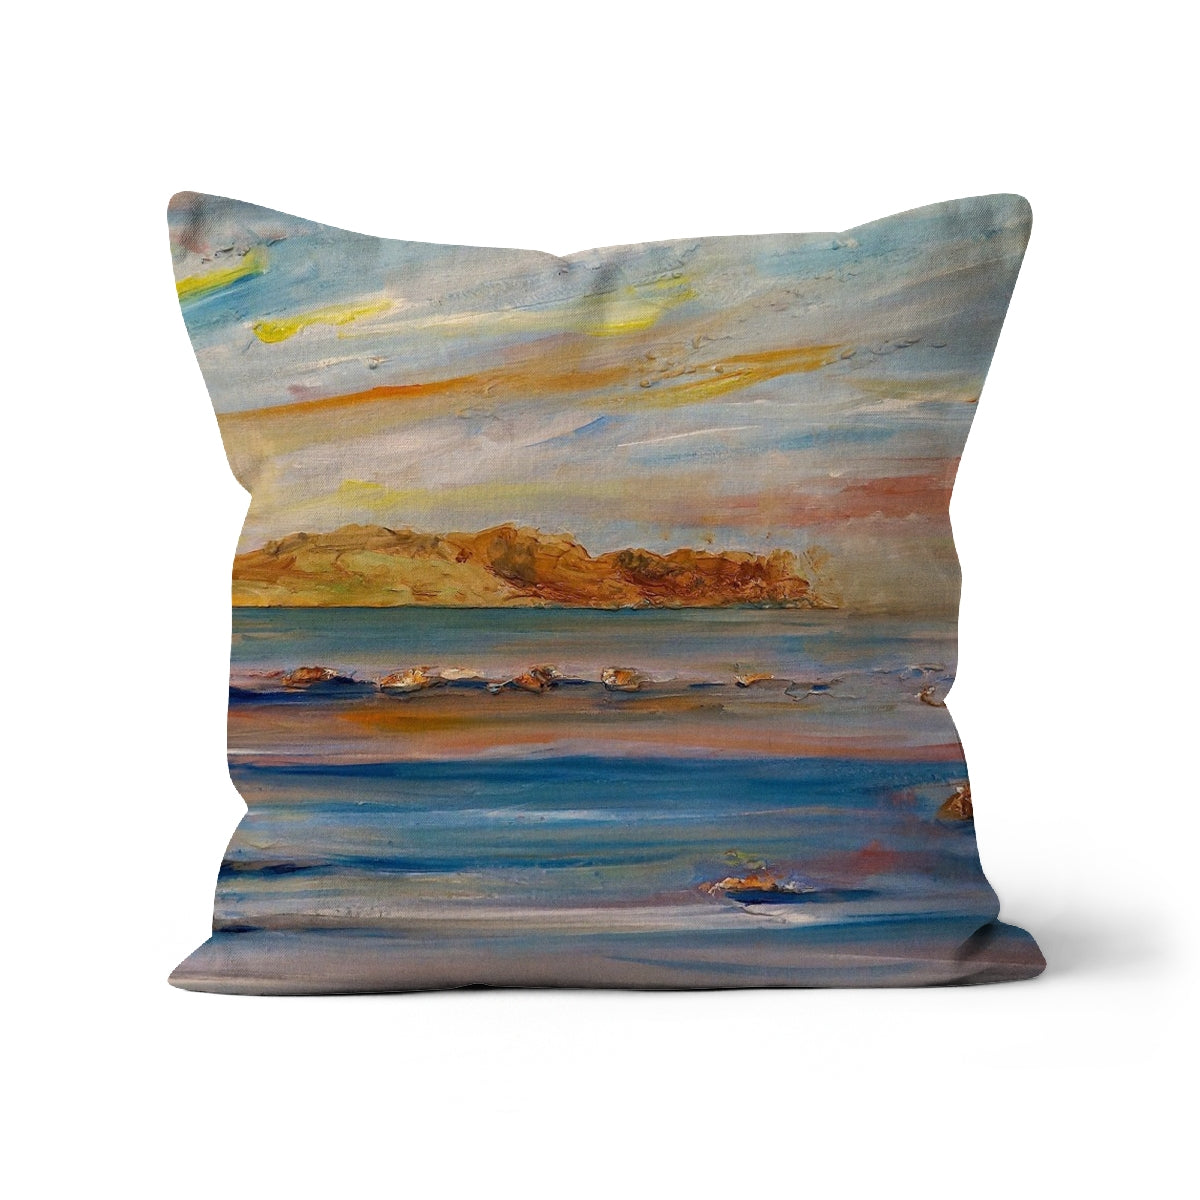 Tiree Dawn Art Gifts Cushion-Cushions-Hebridean Islands Art Gallery-Linen-18"x18"-Paintings, Prints, Homeware, Art Gifts From Scotland By Scottish Artist Kevin Hunter